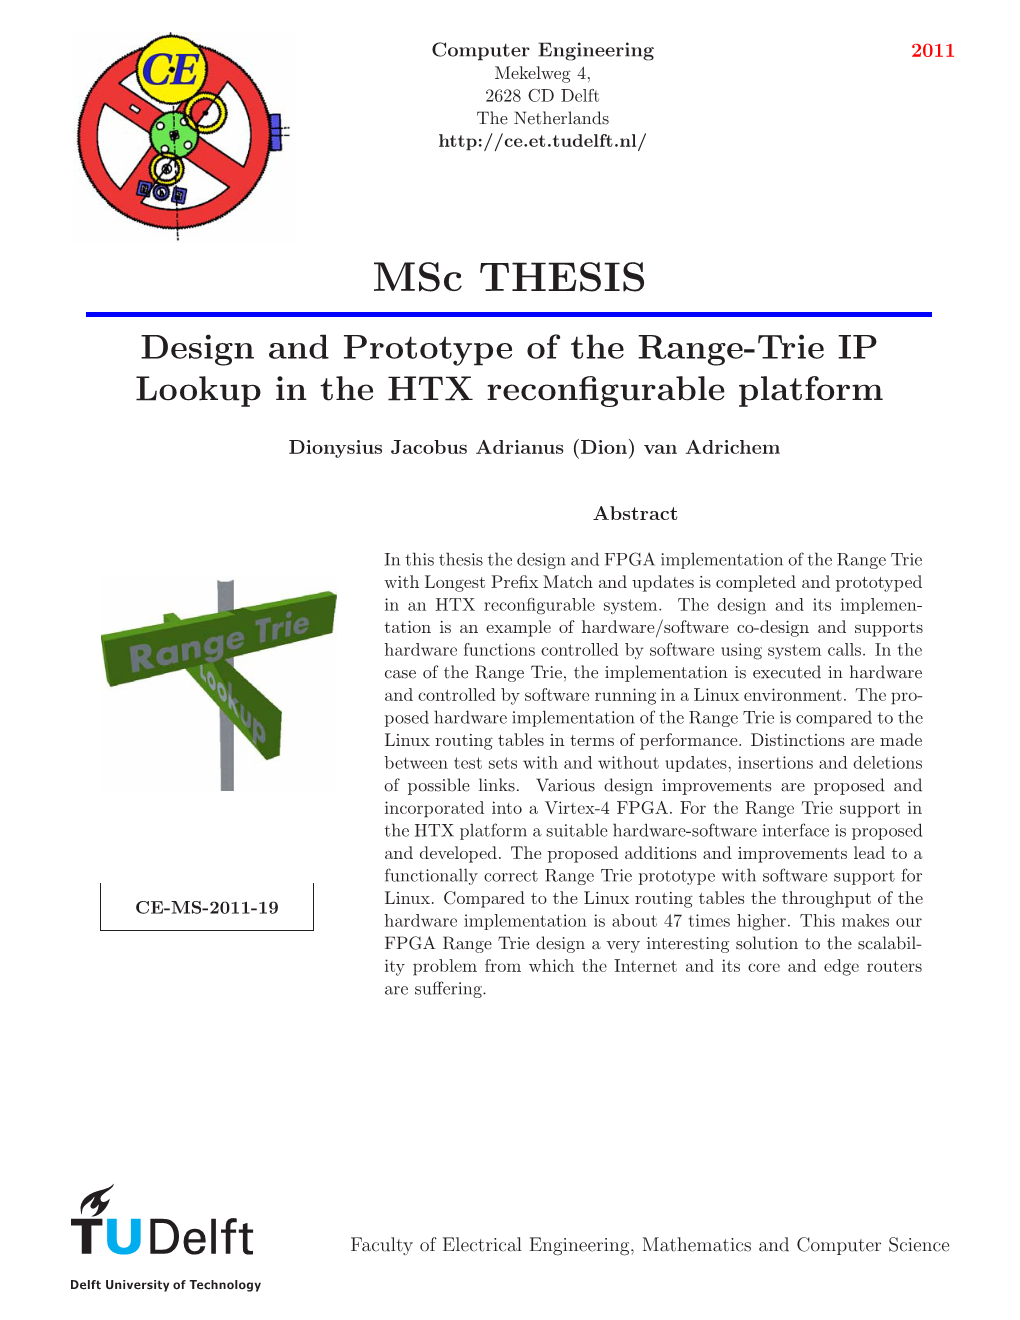 Design and Prototype of the Range-Trie IP Lookup in the HTX Reconﬁgurable Platform